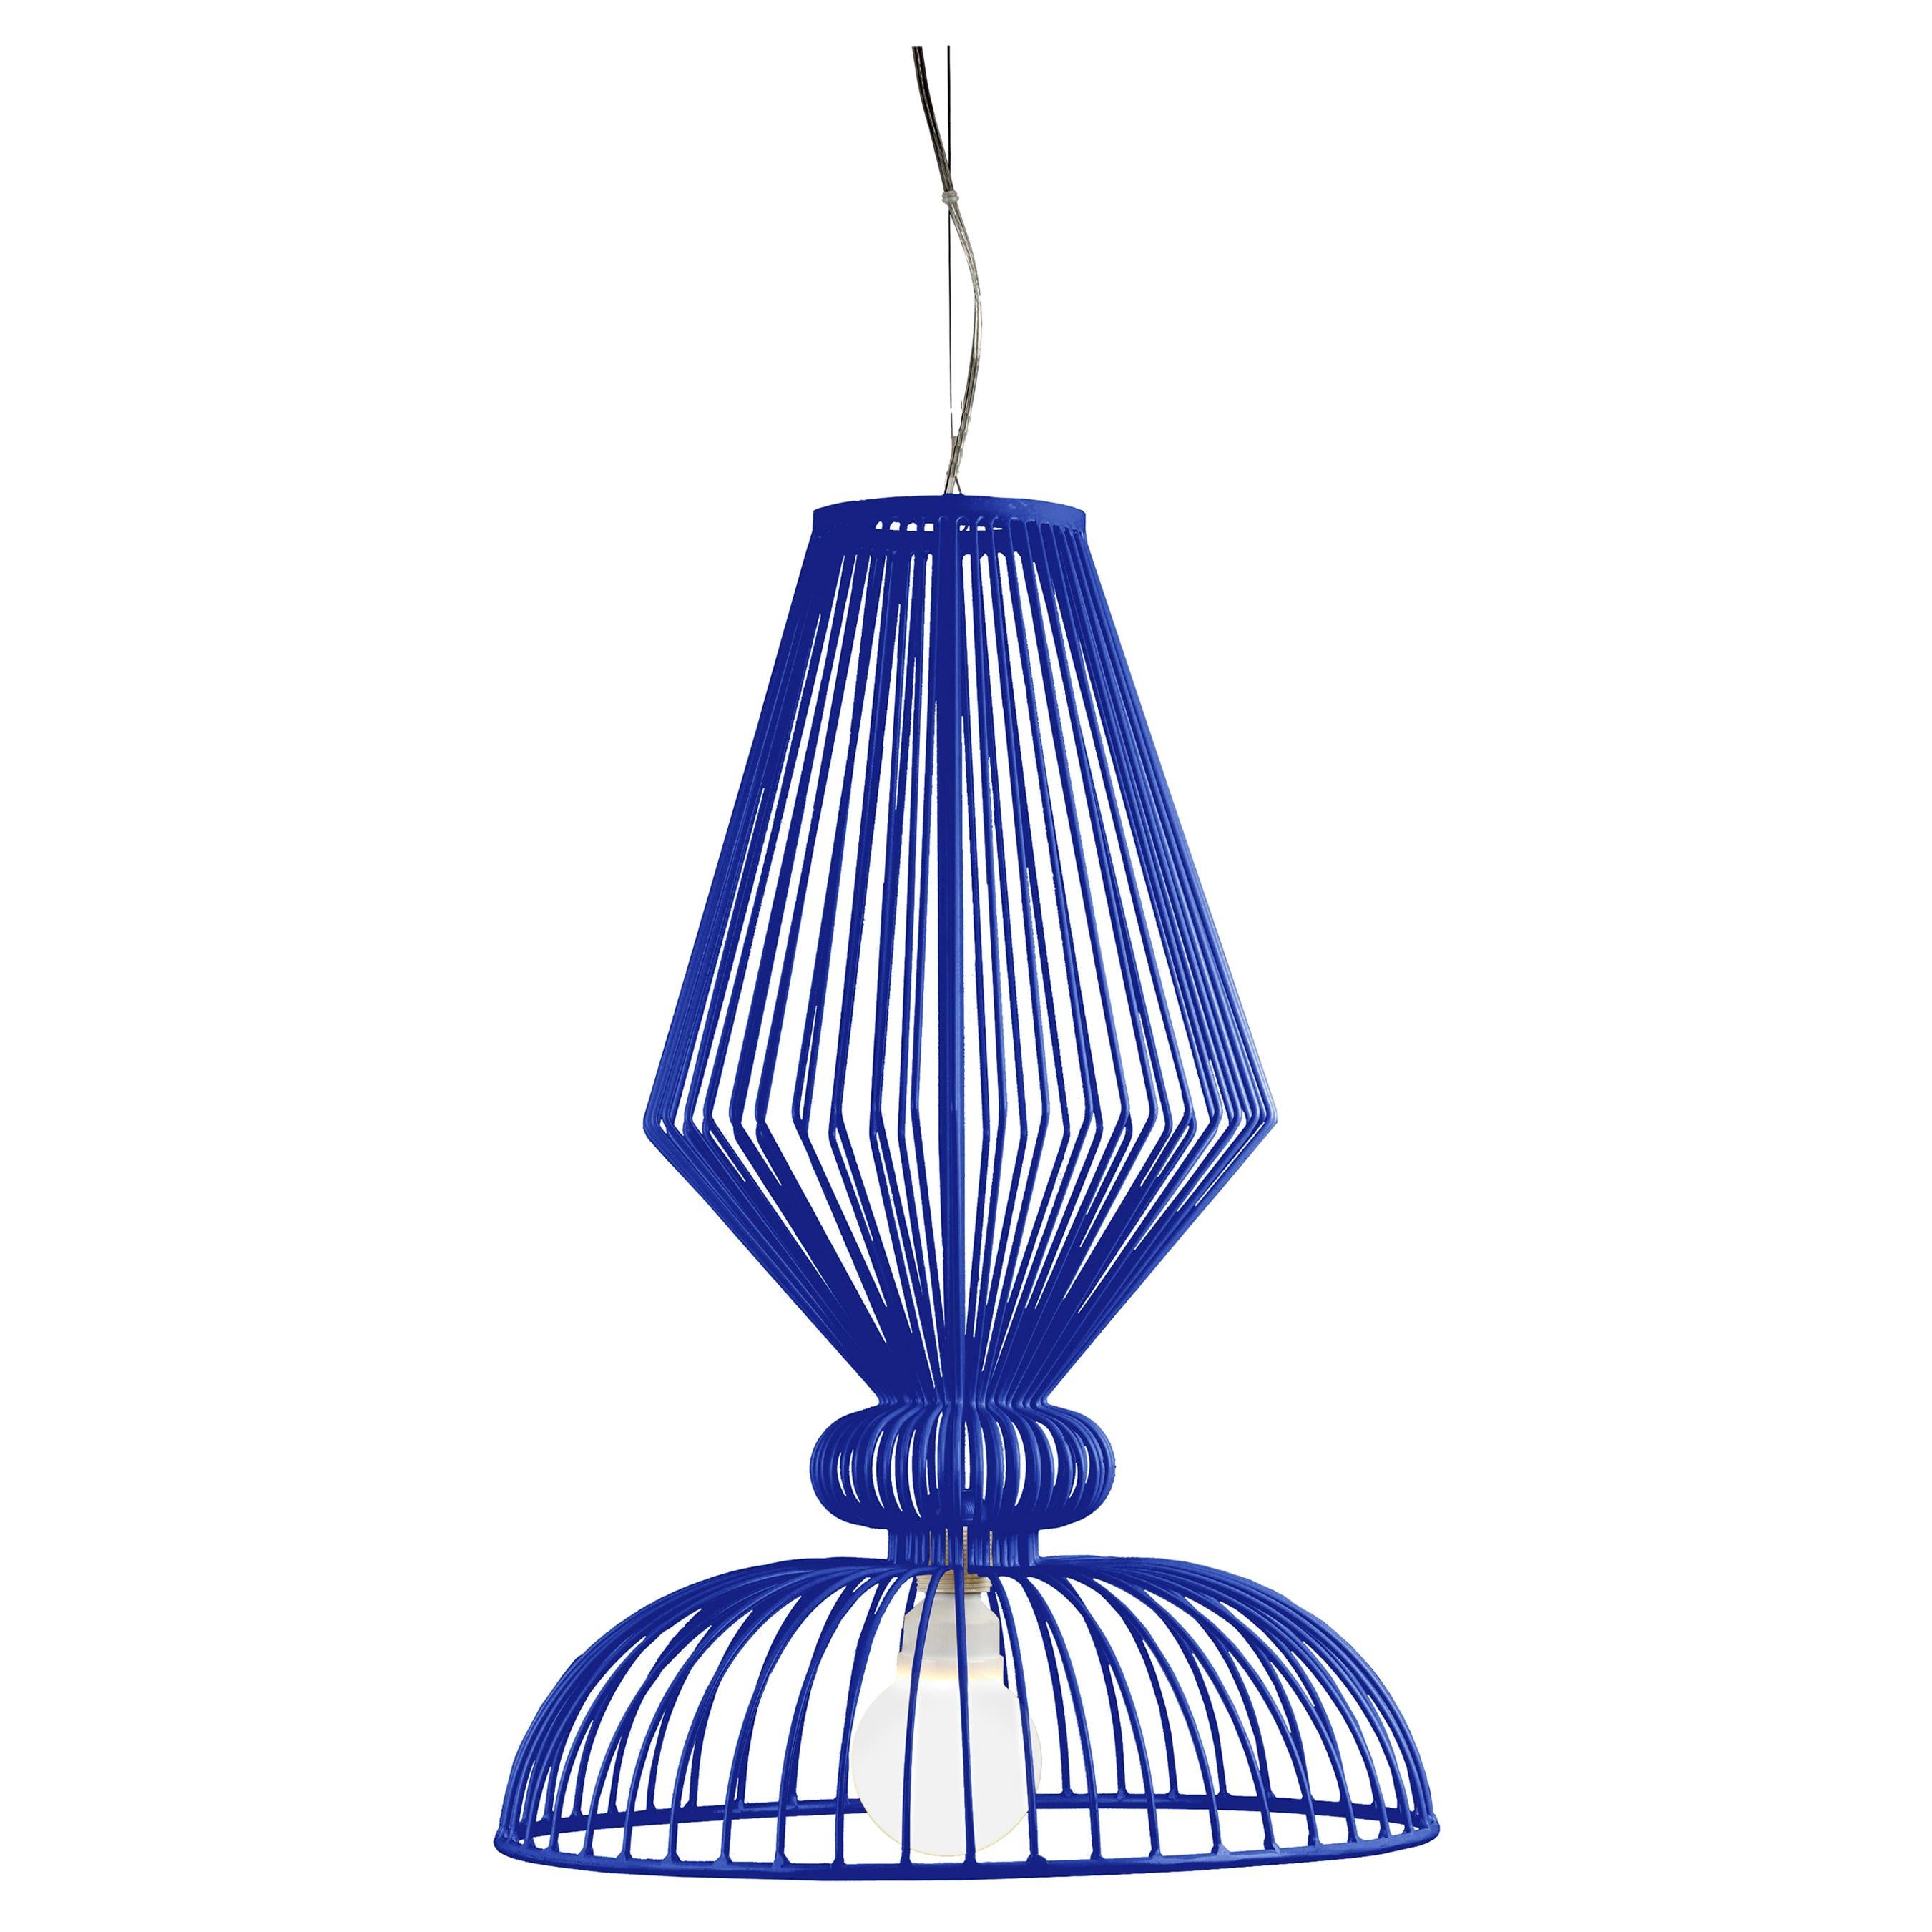 Contemporary Industrial Inspired Expand Pendant Lamp Cobalt Blue For Sale